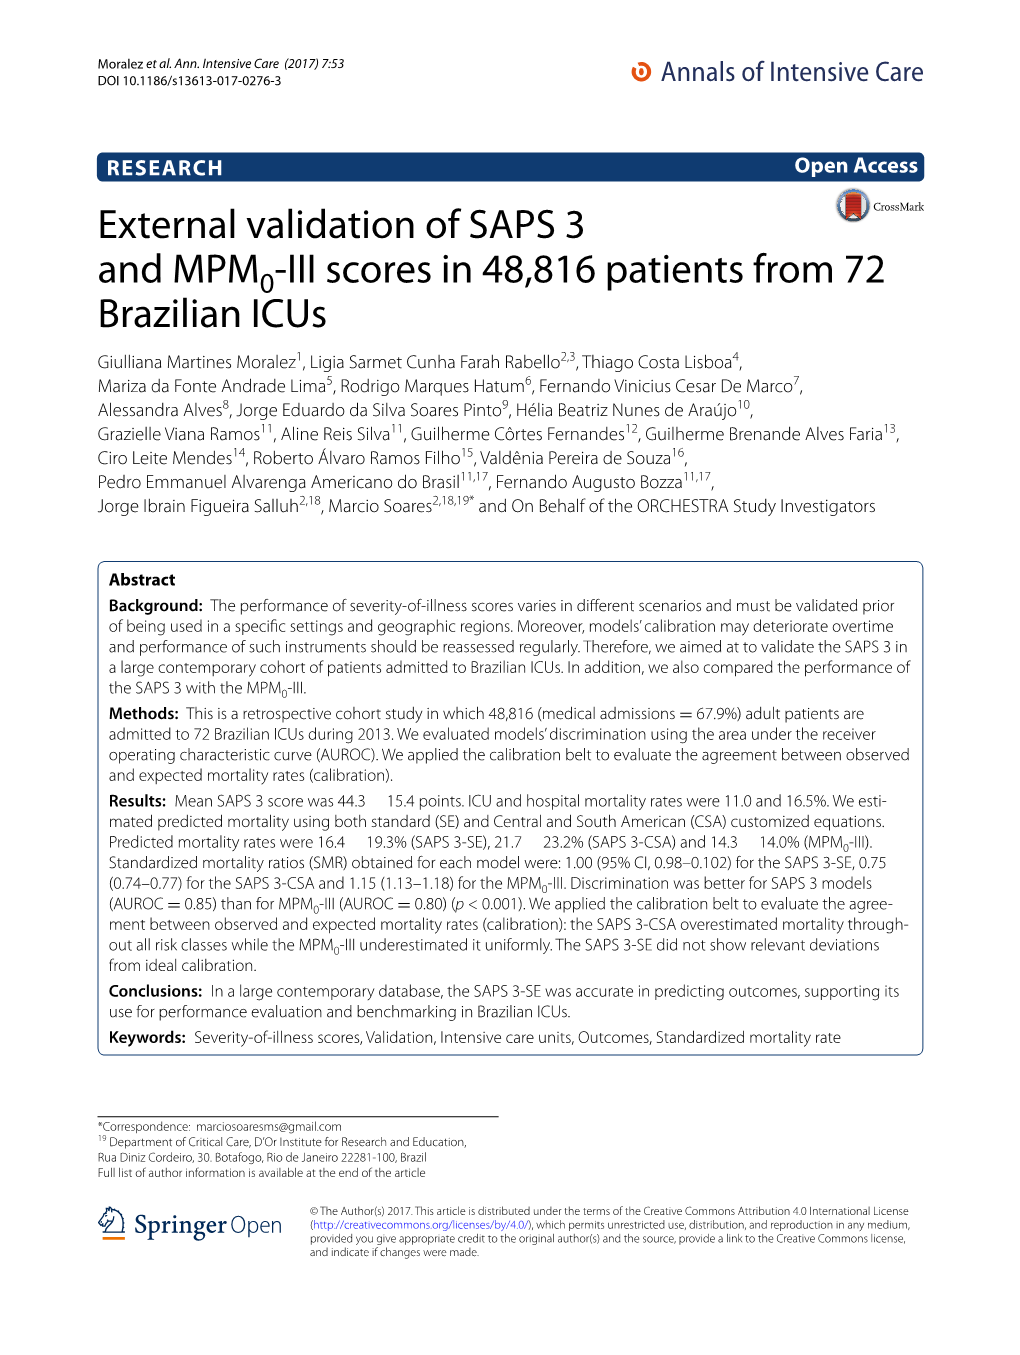 External Validation of SAPS 3 and MPM0-III Scores in 48,816 Patients